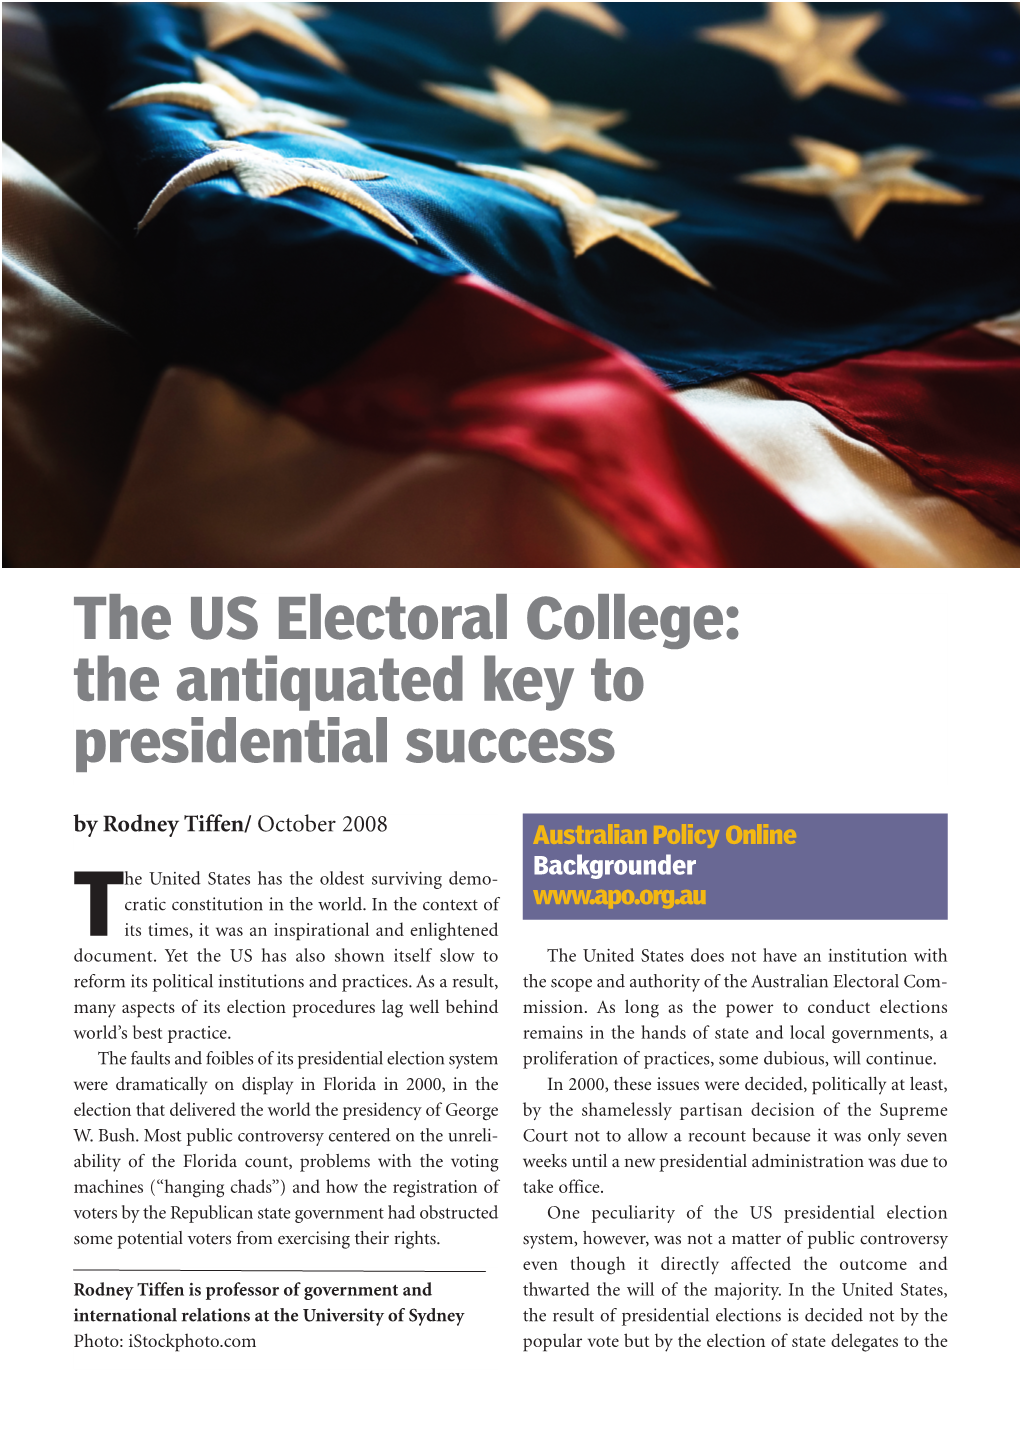 The US Electoral College: the Antiquated Key to Presidential Success by Rodney Tiffen/ October 2008 Australian Policy Online